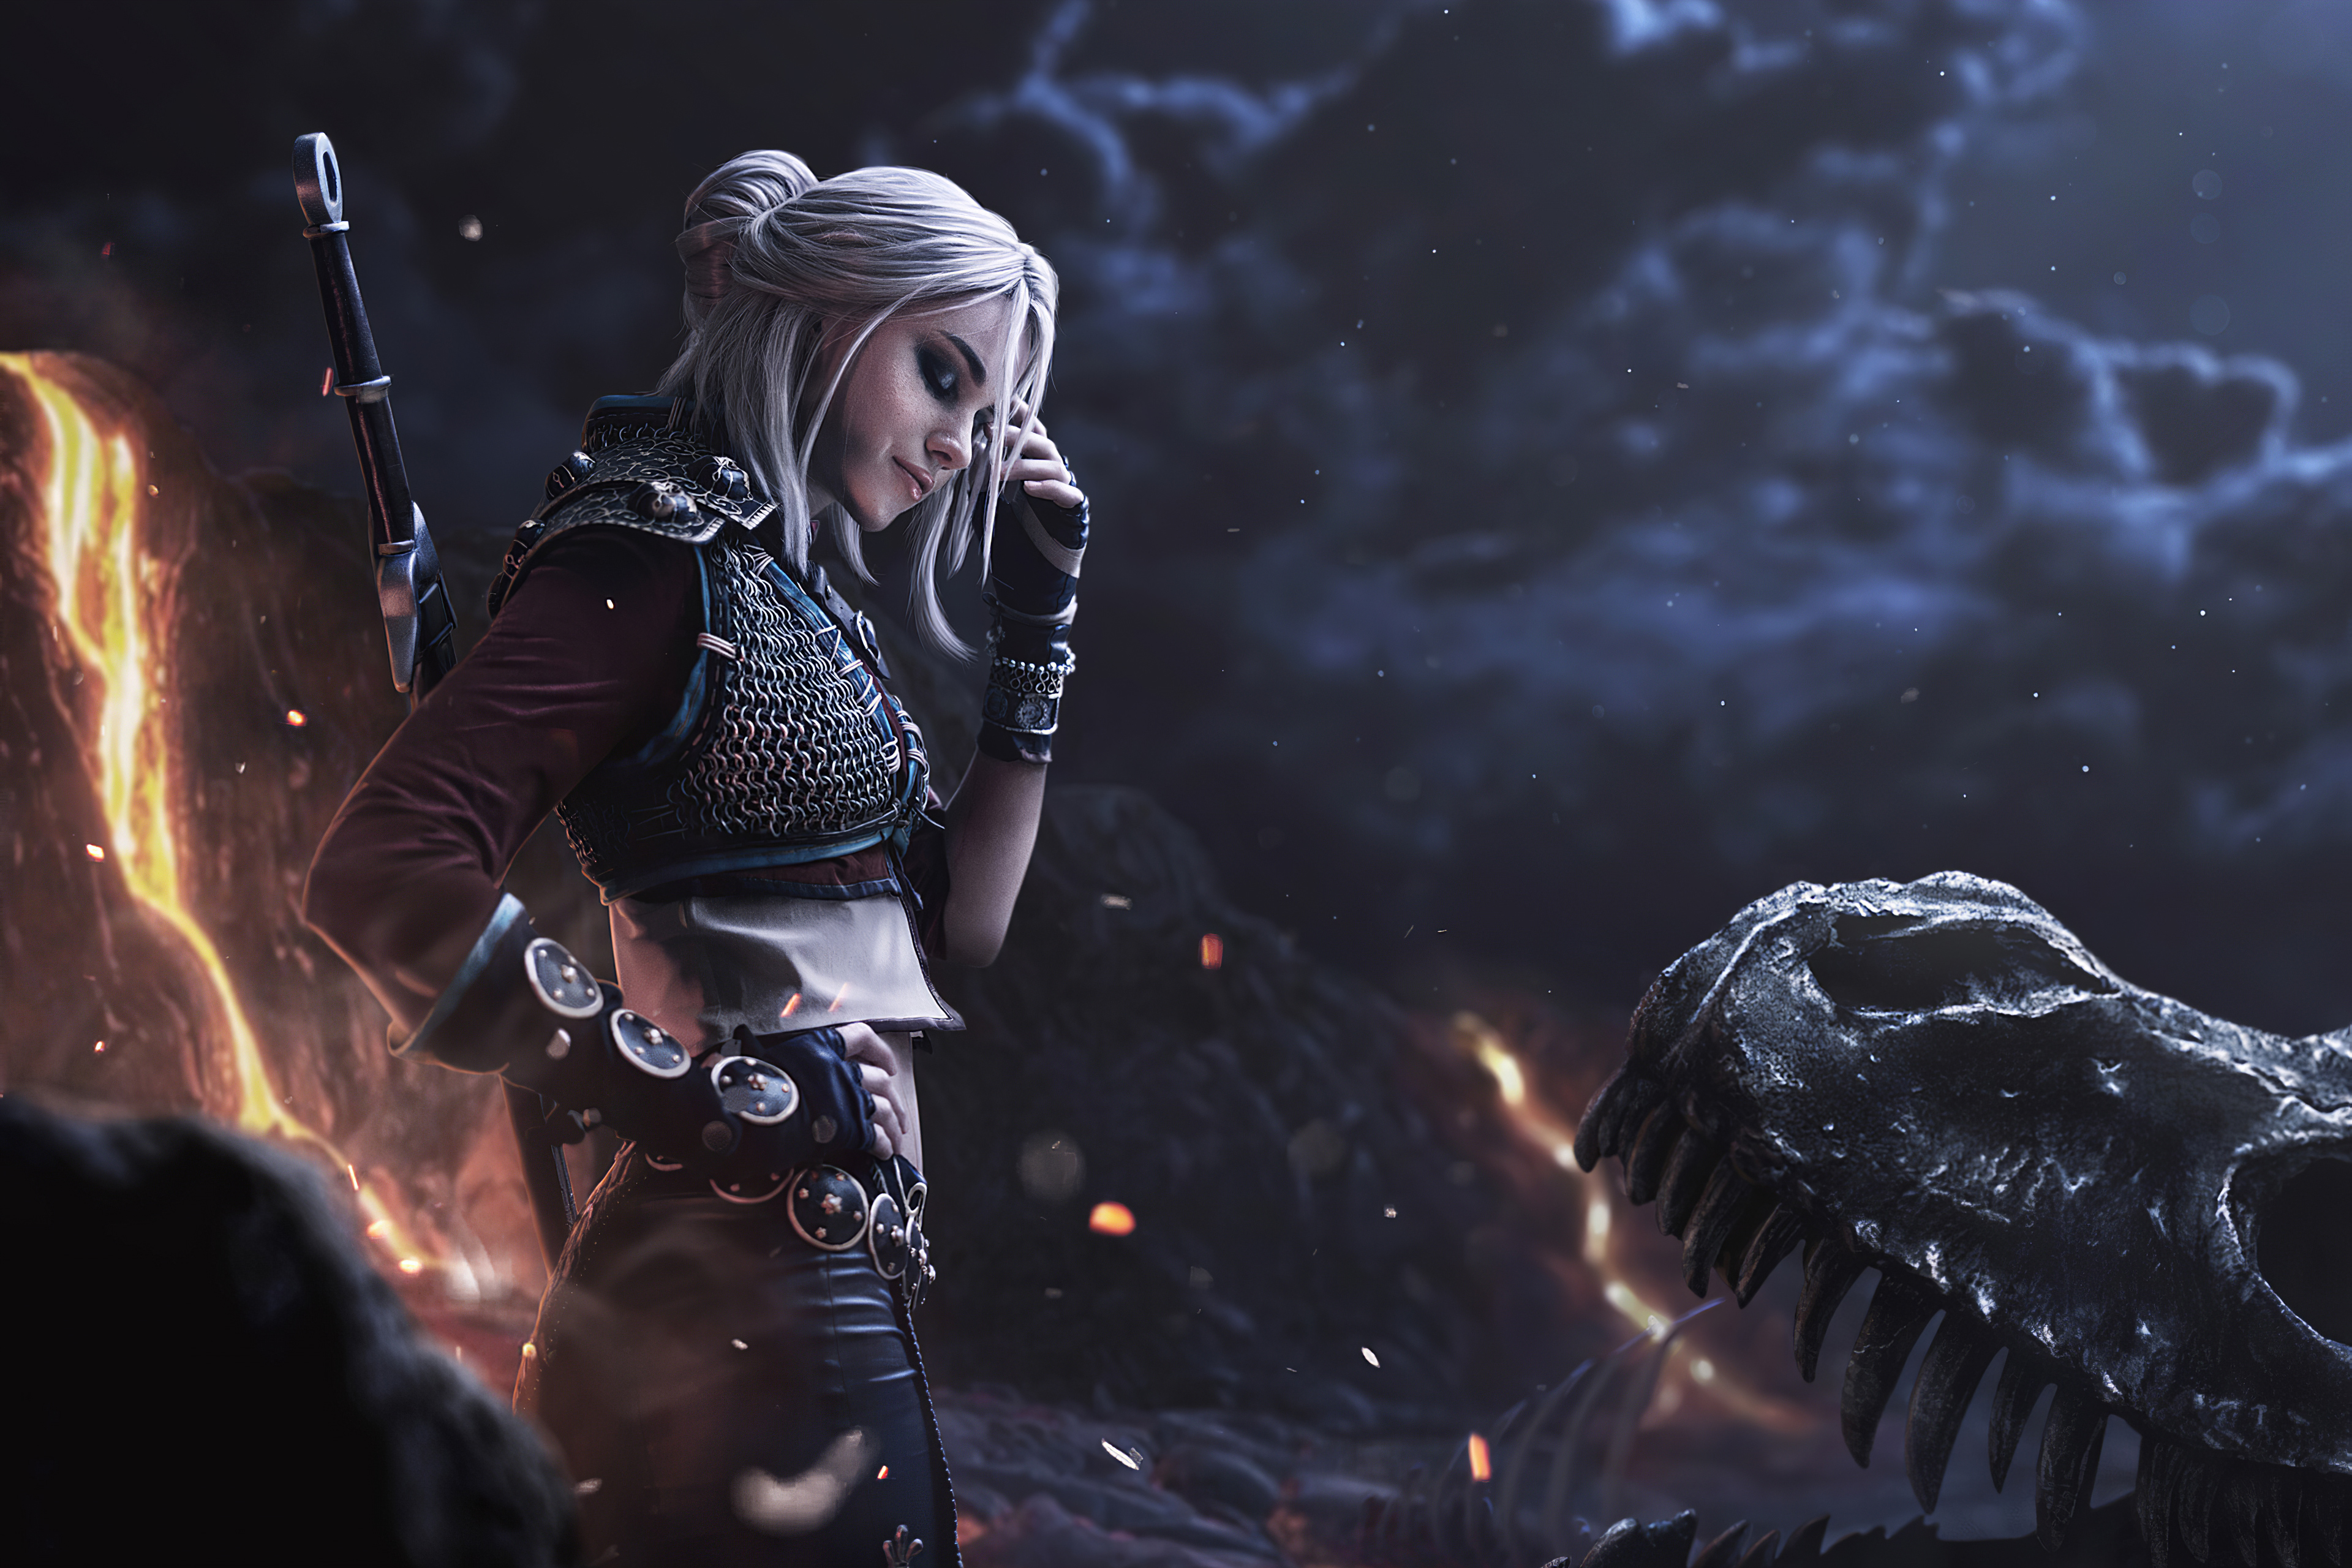 Ciri The Witcher Cosplay Model The Witcher 3 Wild Hunt White Hair Woman 3840x2560